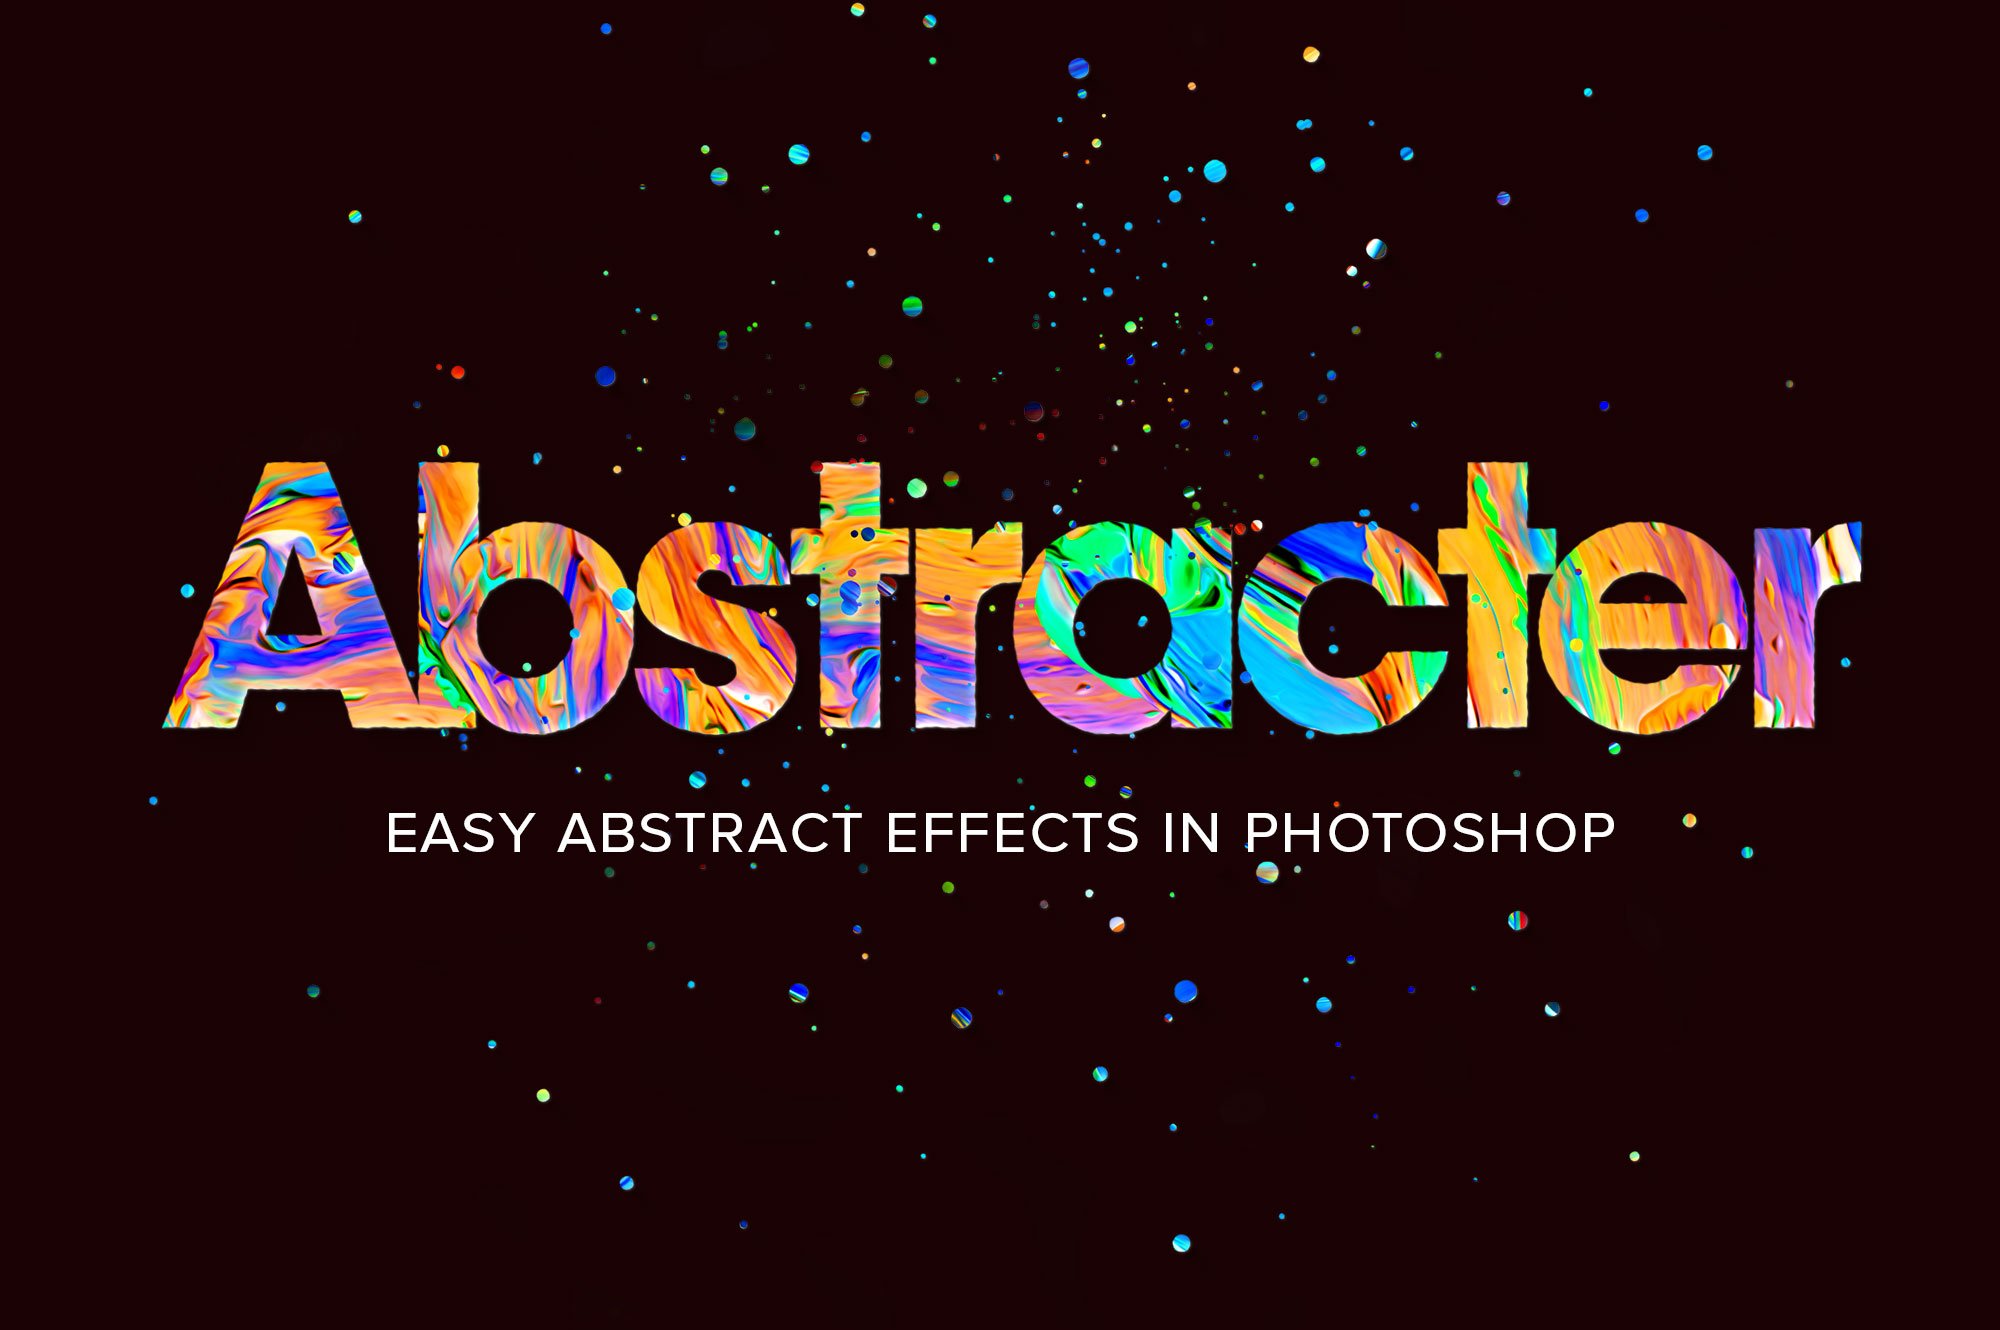 Abstracter: Smart PSD + Layer Stylescover image.